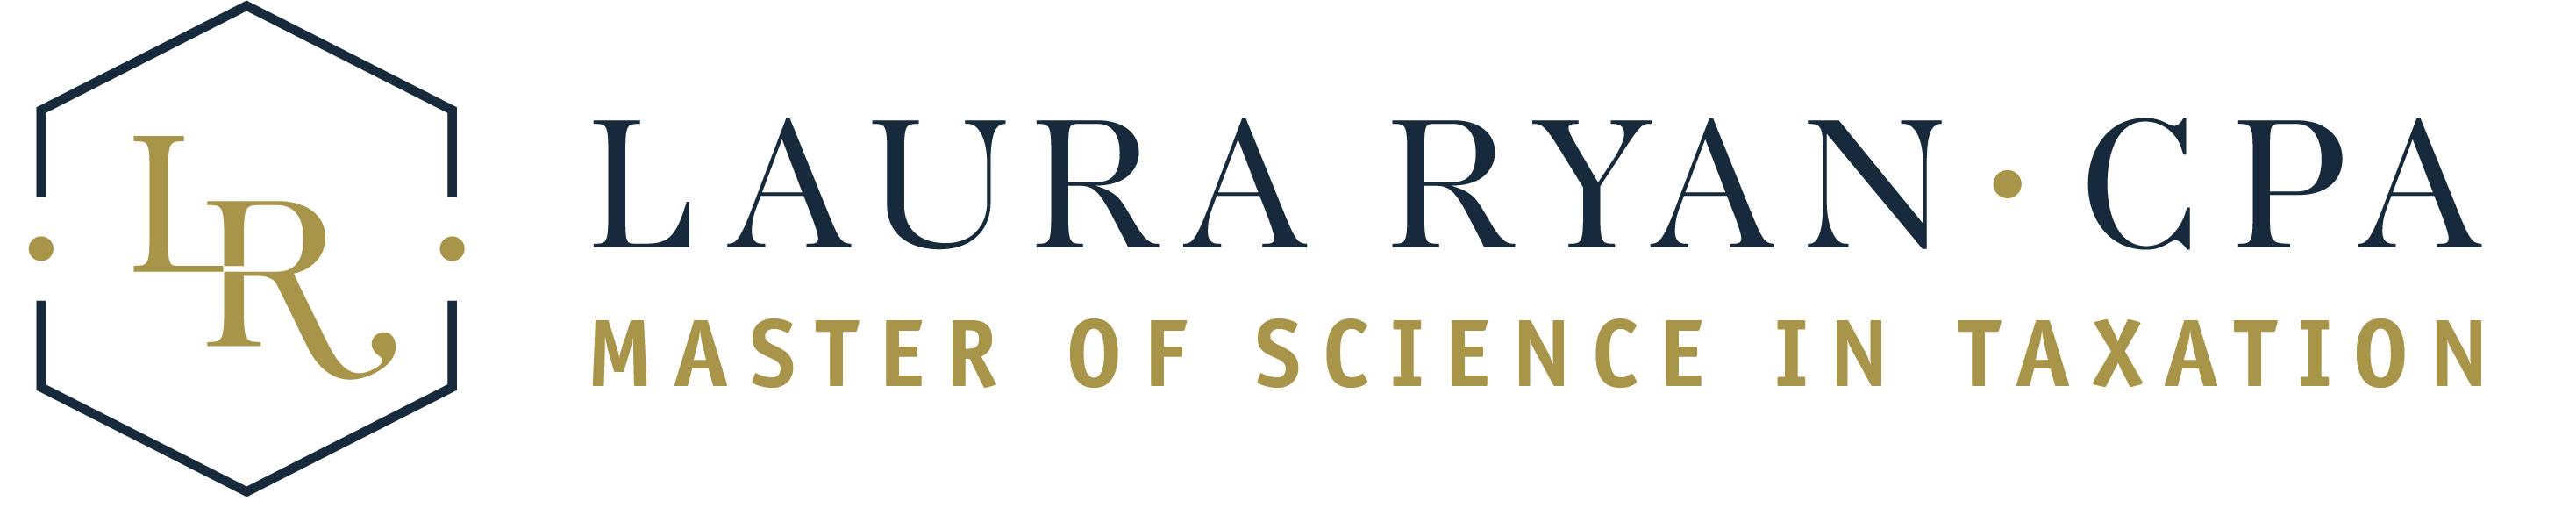 Laura Ryan CPA - Master of Science in Taxation Logo